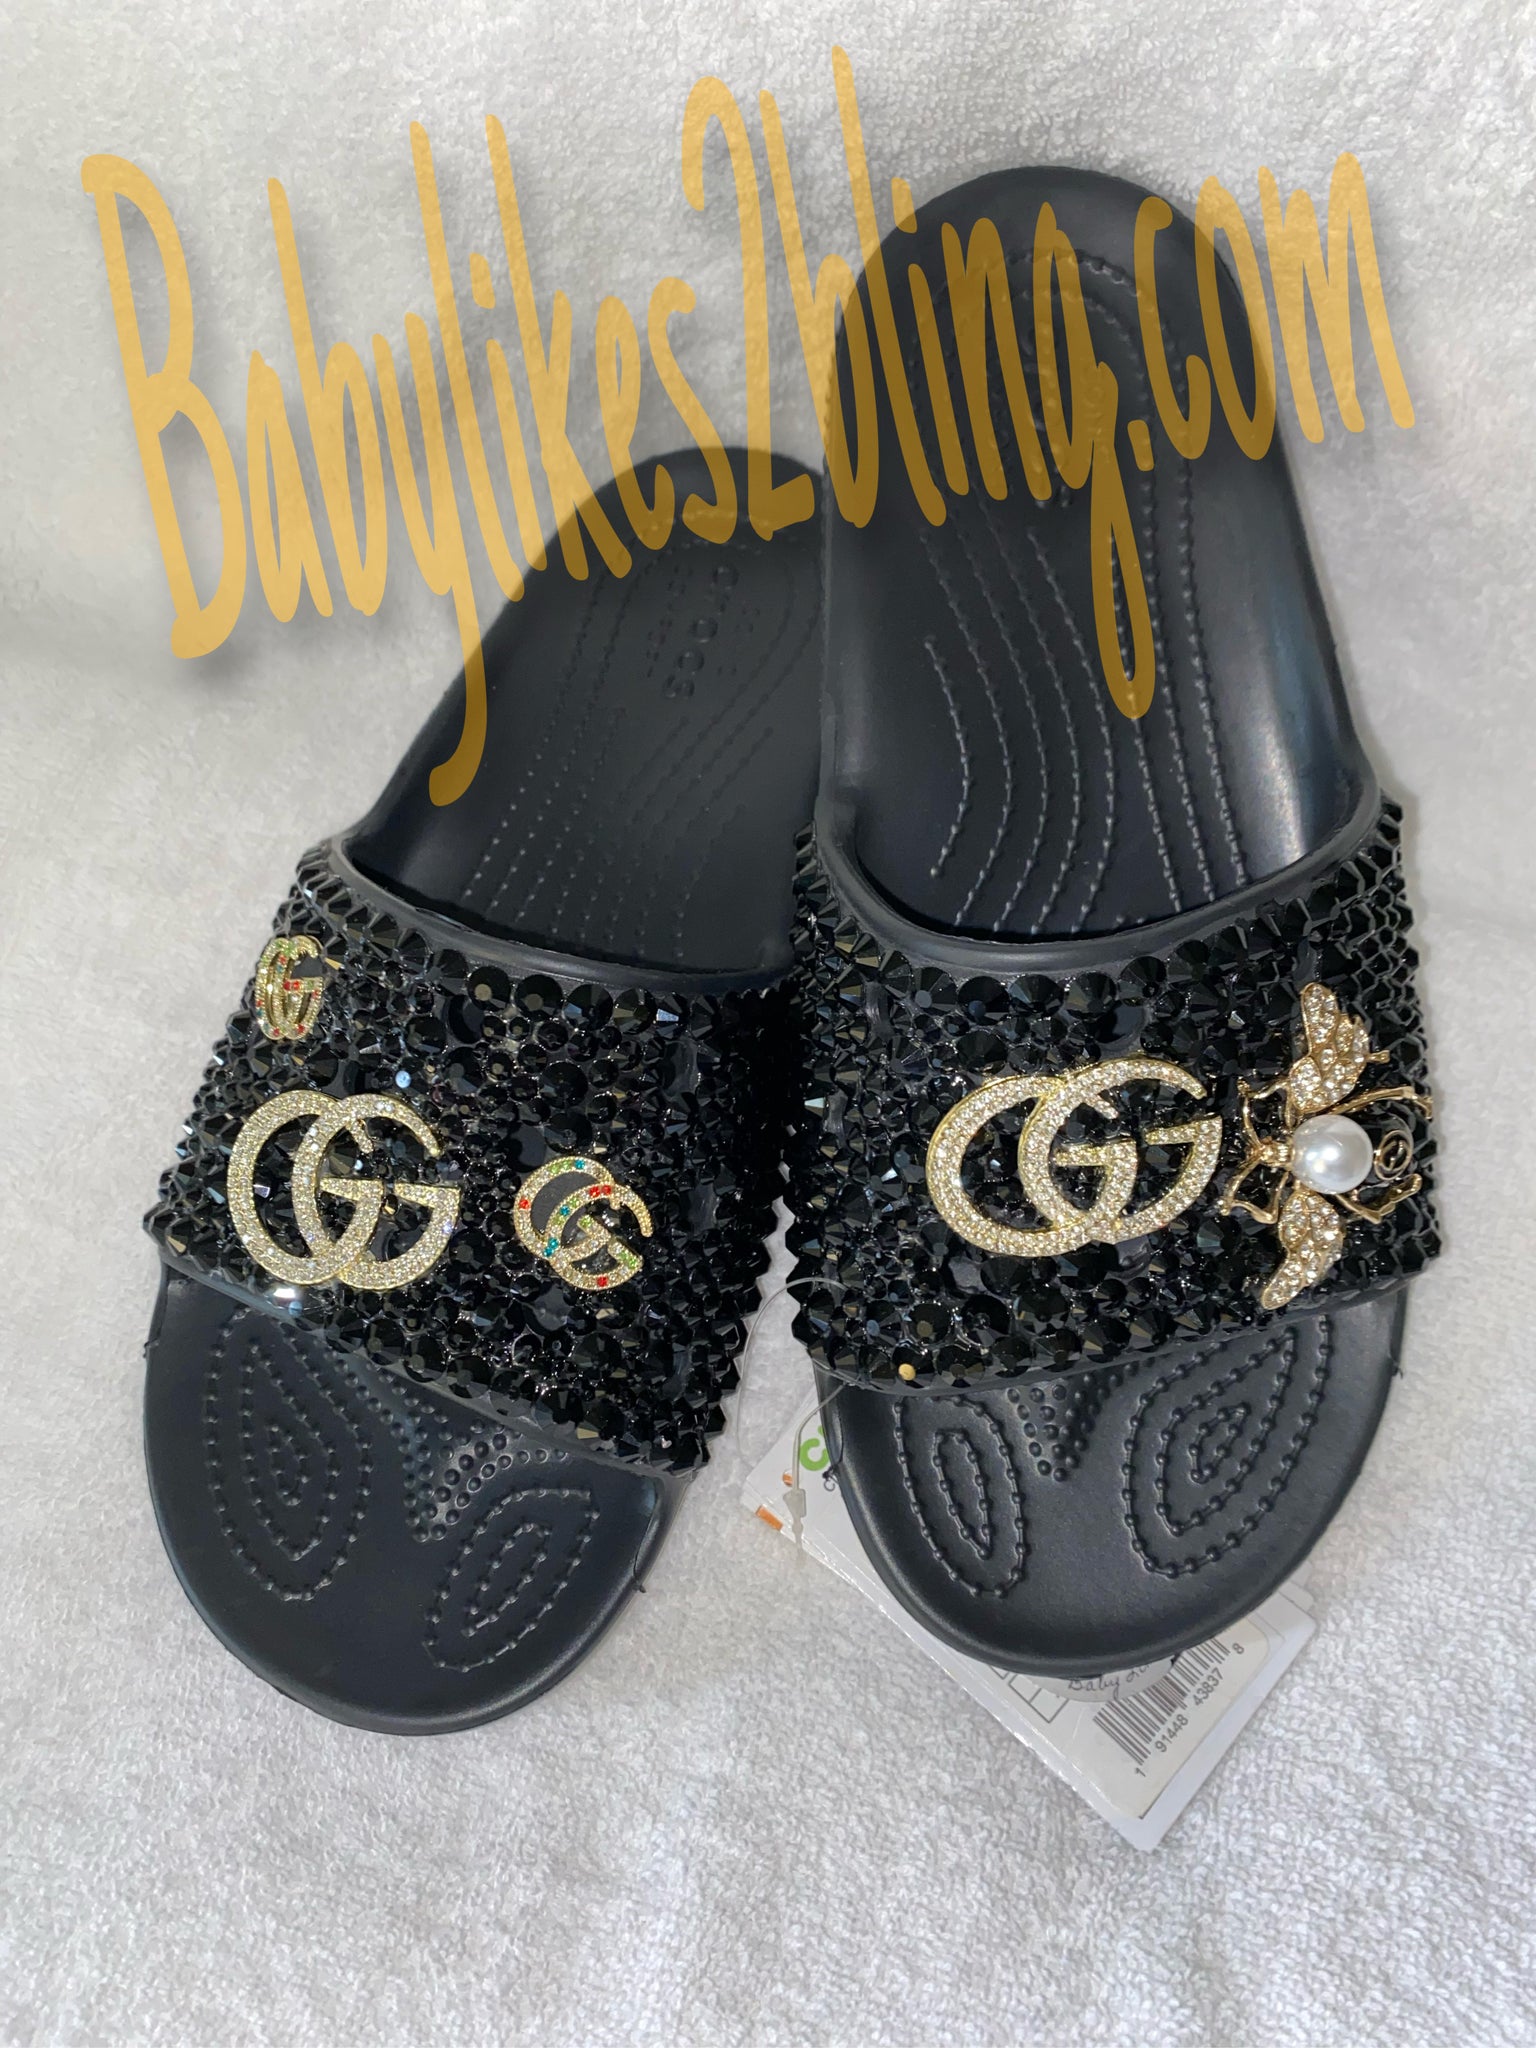 G Red, Black and Gold Bedazzled Crocs